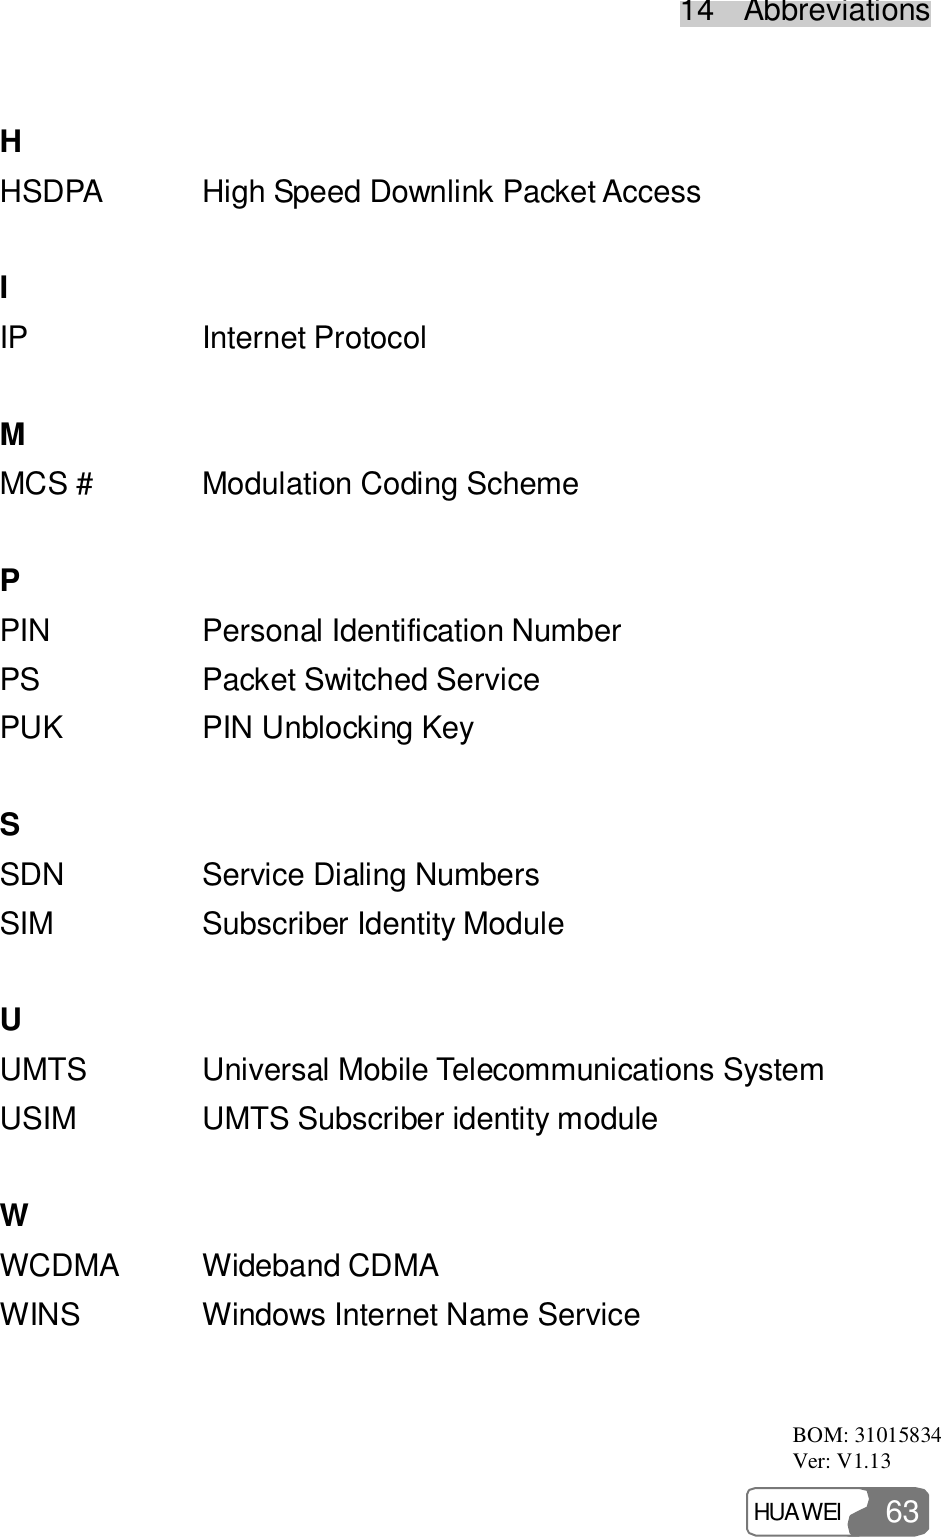 14  Abbreviations HUAWEI  63    H   HSDPA  High Speed Downlink Packet Access    I   IP  Internet Protocol    M   MCS #  Modulation Coding Scheme    P   PIN  Personal Identification Number PS  Packet Switched Service PUK  PIN Unblocking Key    S   SDN  Service Dialing Numbers SIM  Subscriber Identity Module    U   UMTS  Universal Mobile Telecommunications System USIM  UMTS Subscriber identity module    W   WCDMA  Wideband CDMA WINS  Windows Internet Name Service  BOM: 31015834 Ver: V1.13 